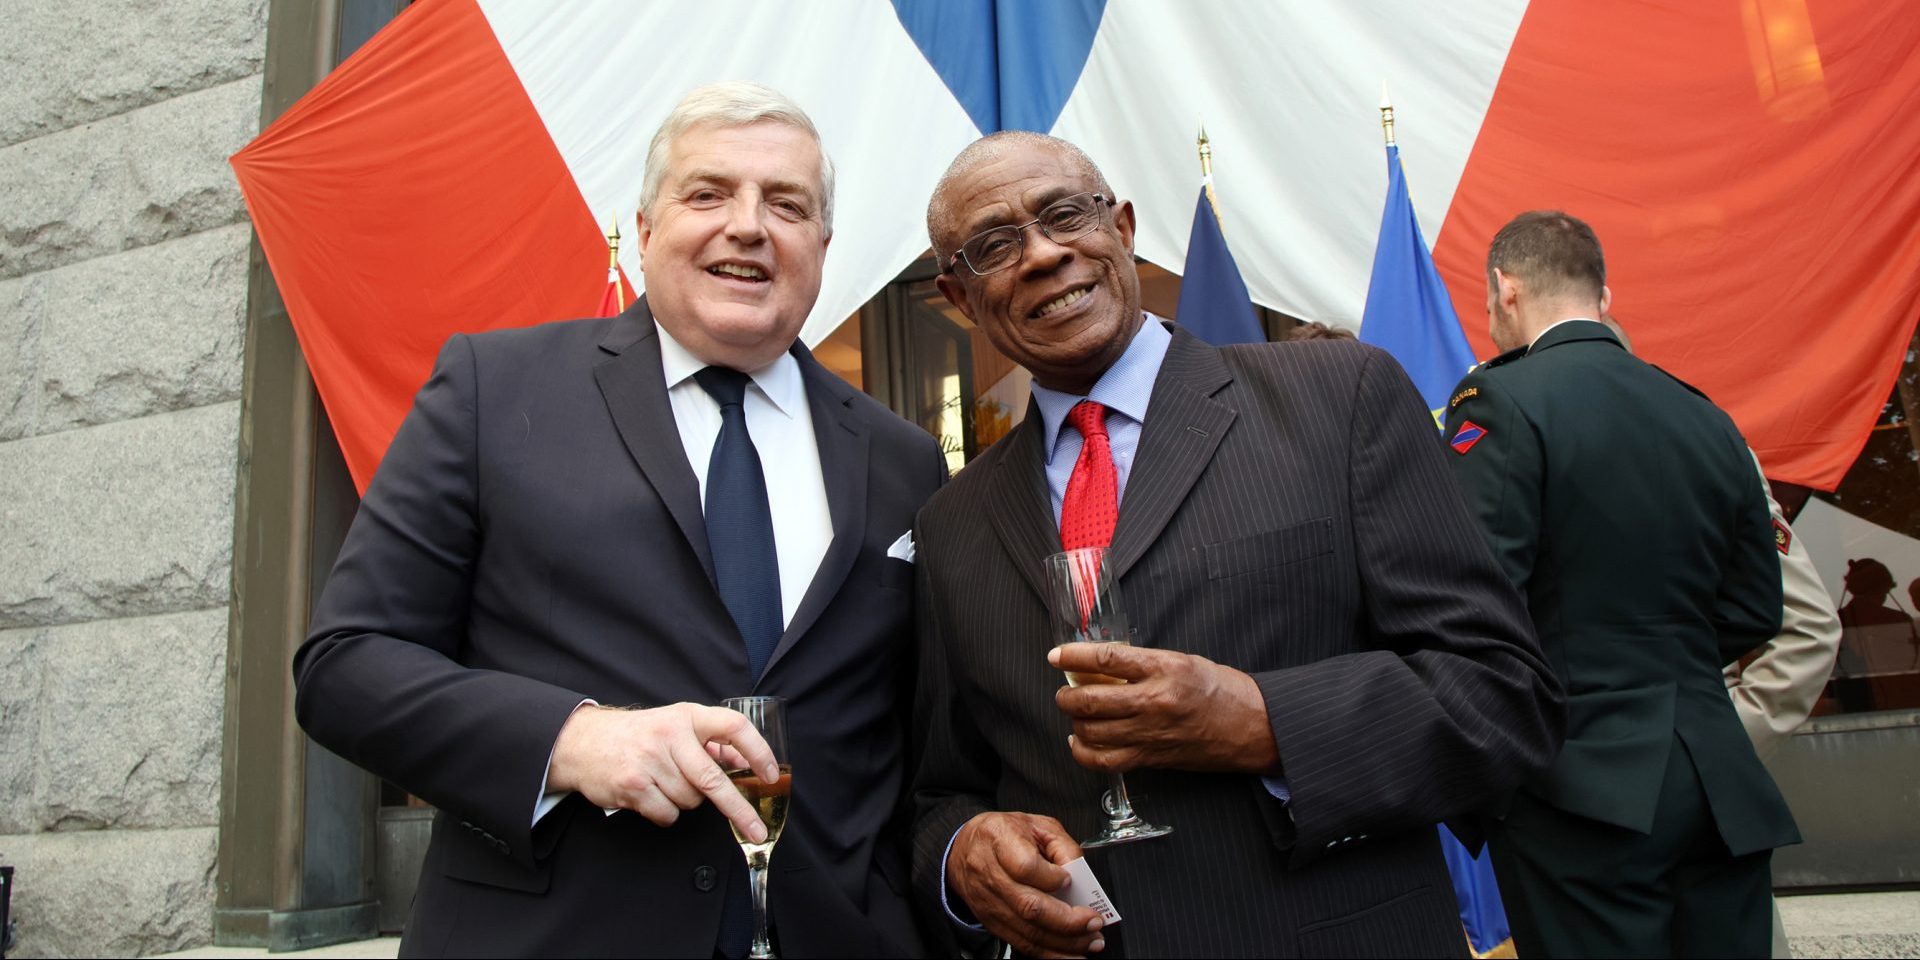 French Ambassador Michel Miraillet, left, and High Commissioner of Barbados Gline Clarke enjoy a glass of champagne at the Bastille Day garden party on July 14 at the French Embassy in Ottawa.